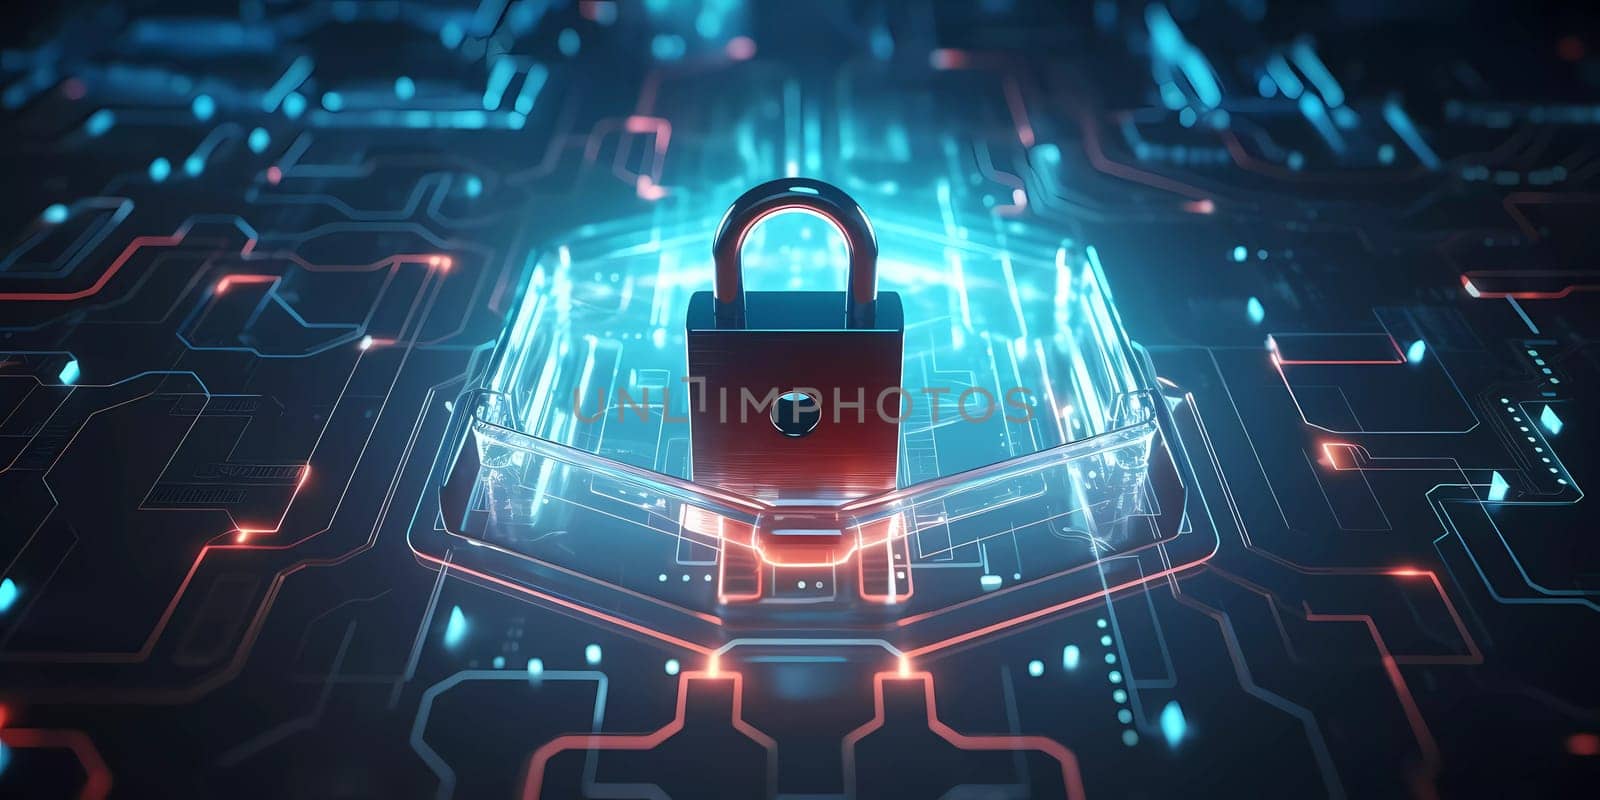 Digital padlock icon, cyber security network and data protection technology on virtual interface screen. Online internet authorized access against cyber attack and business data privacy concept. by sergeykoshkin